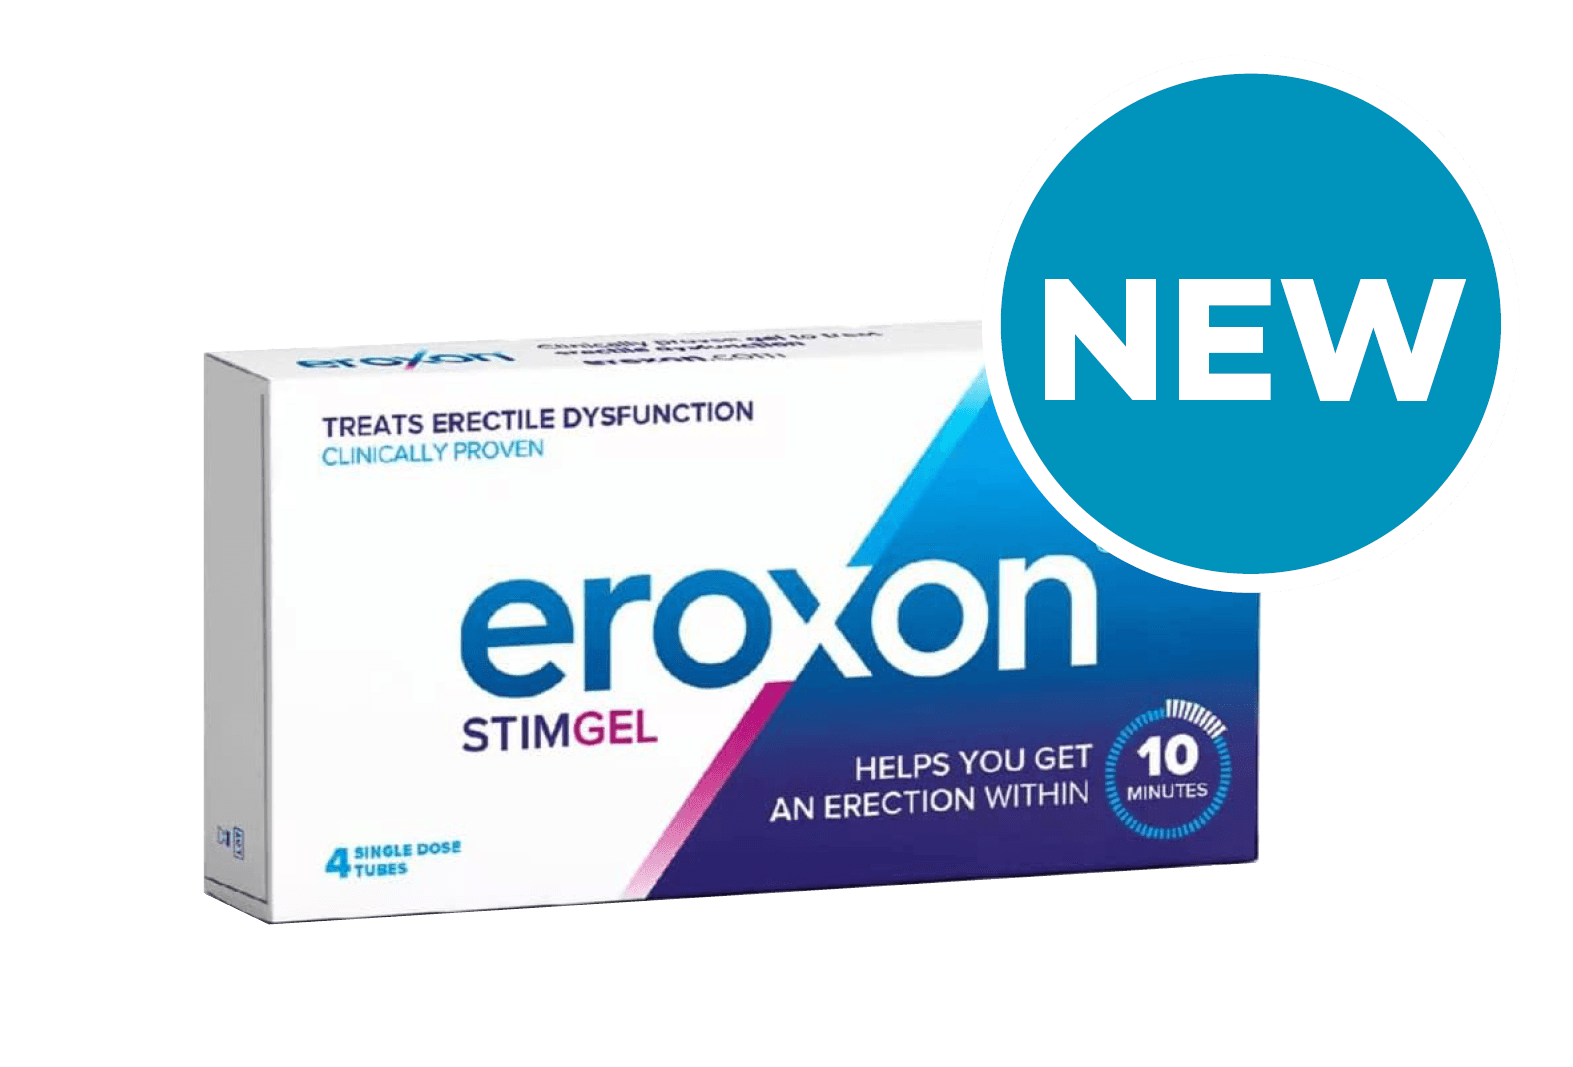 eroxon gel product with new roundel 